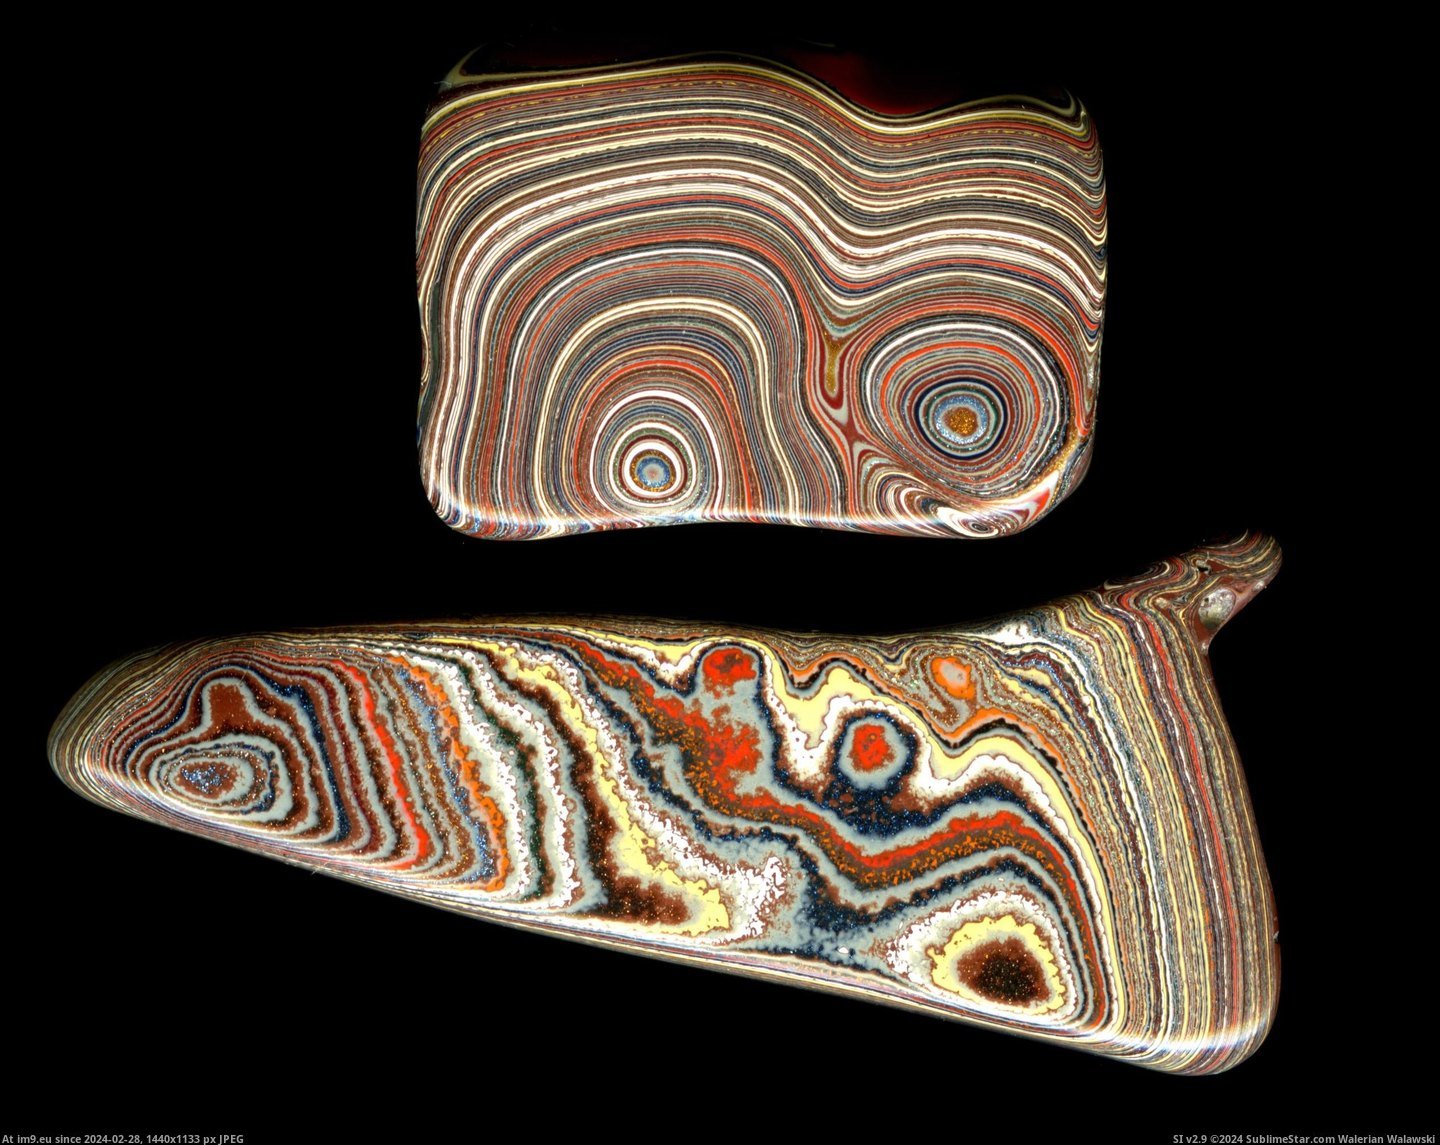 #Paint #Cars #Layers #Thousands #Agate #Enamel #Fordite #Baked #Detroit #Repeatedly [Pics] This is Fordite, or ''Detroit agate'', thousands of layers of repeatedly baked enamel paint from the days when cars were  Pic. (Obraz z album My r/PICS favs))